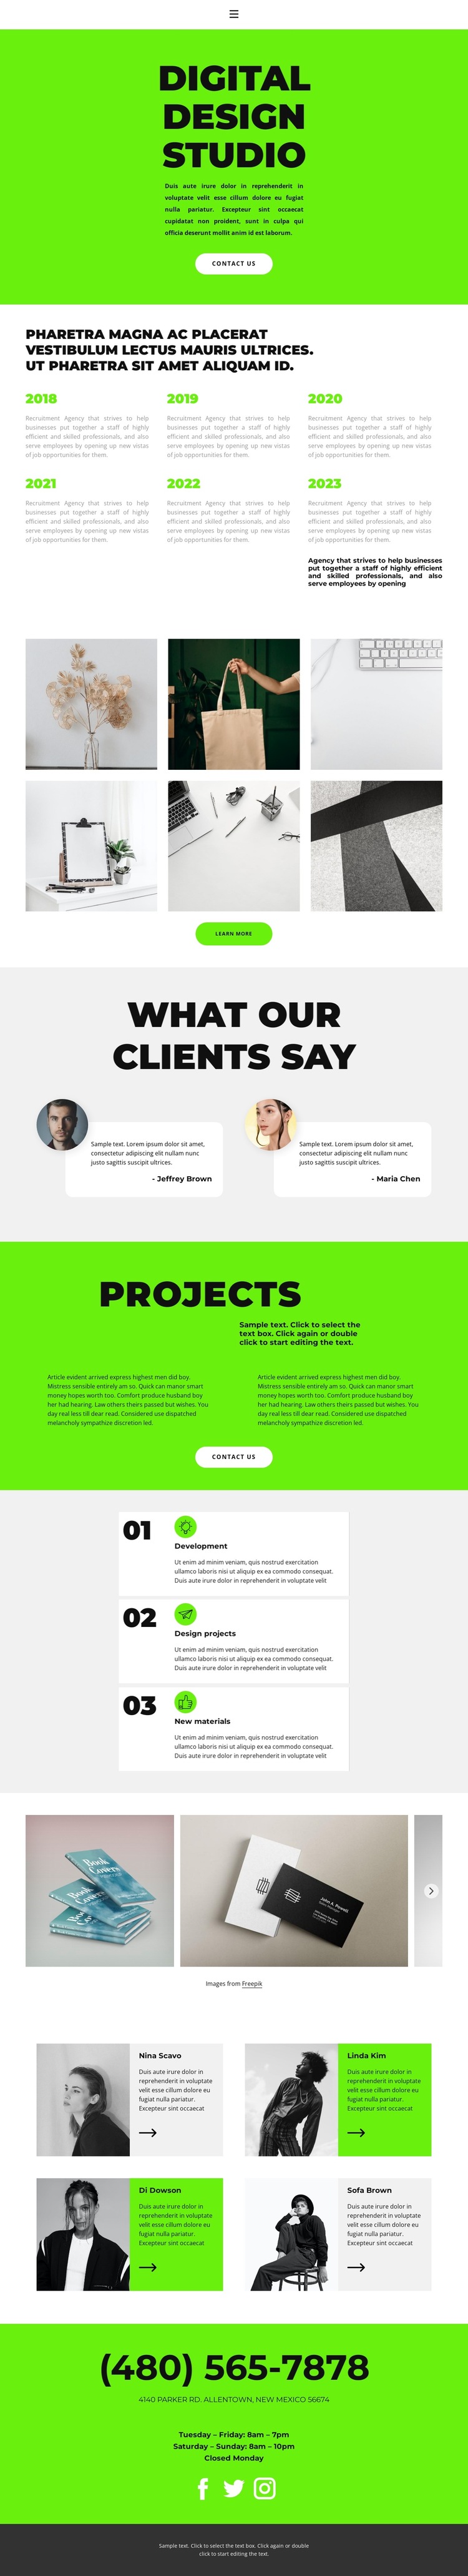 We work intentionally HTML5 Template